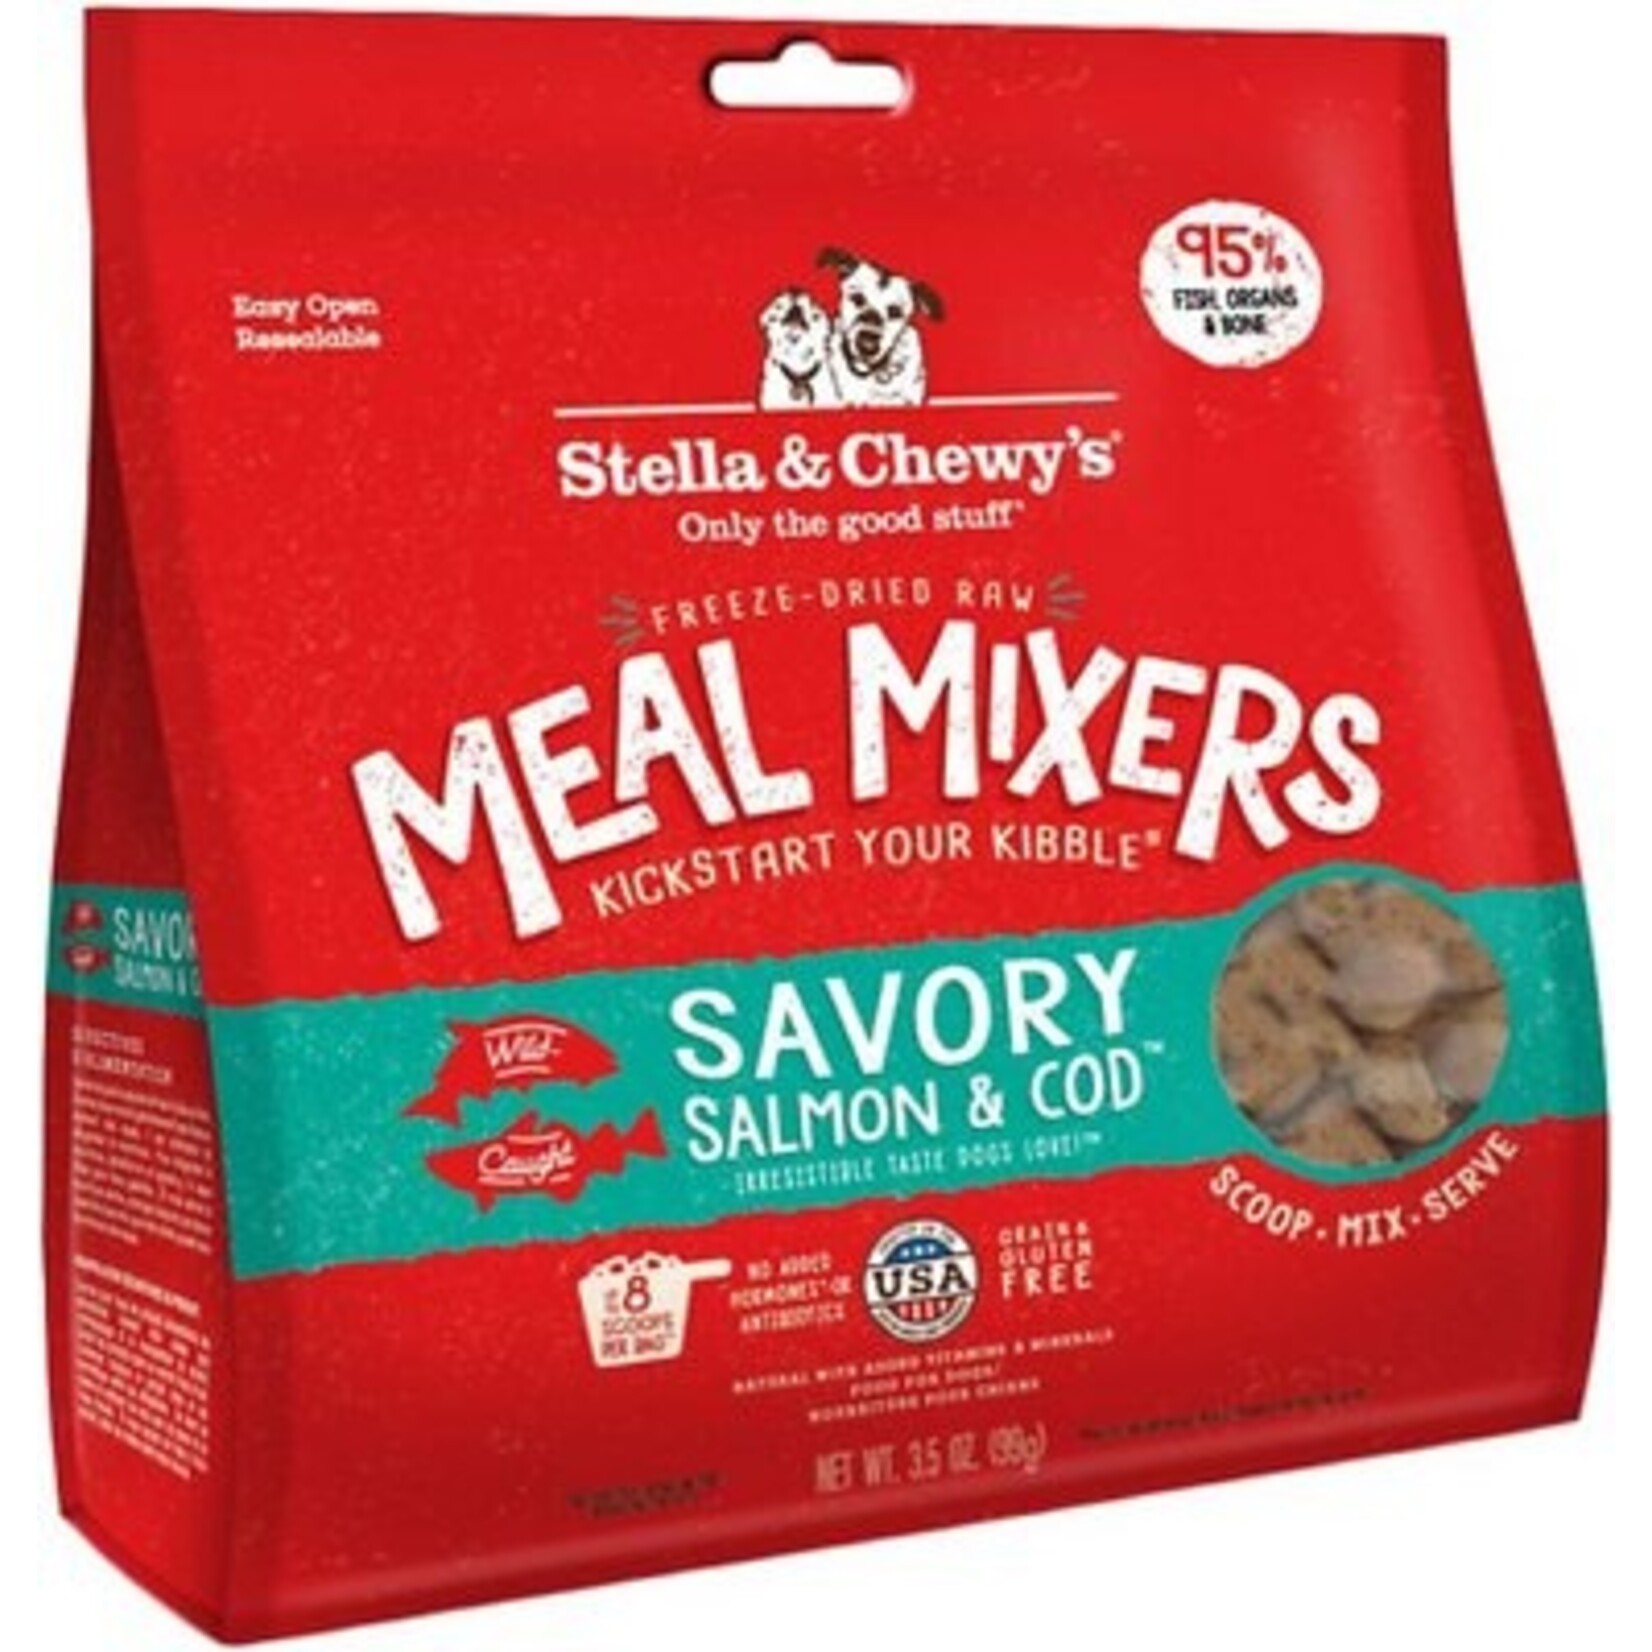 Stella & Chewy's Savory Salmon & Cod - Freeze-Dried Meal Mixer - Stella & Chewy's